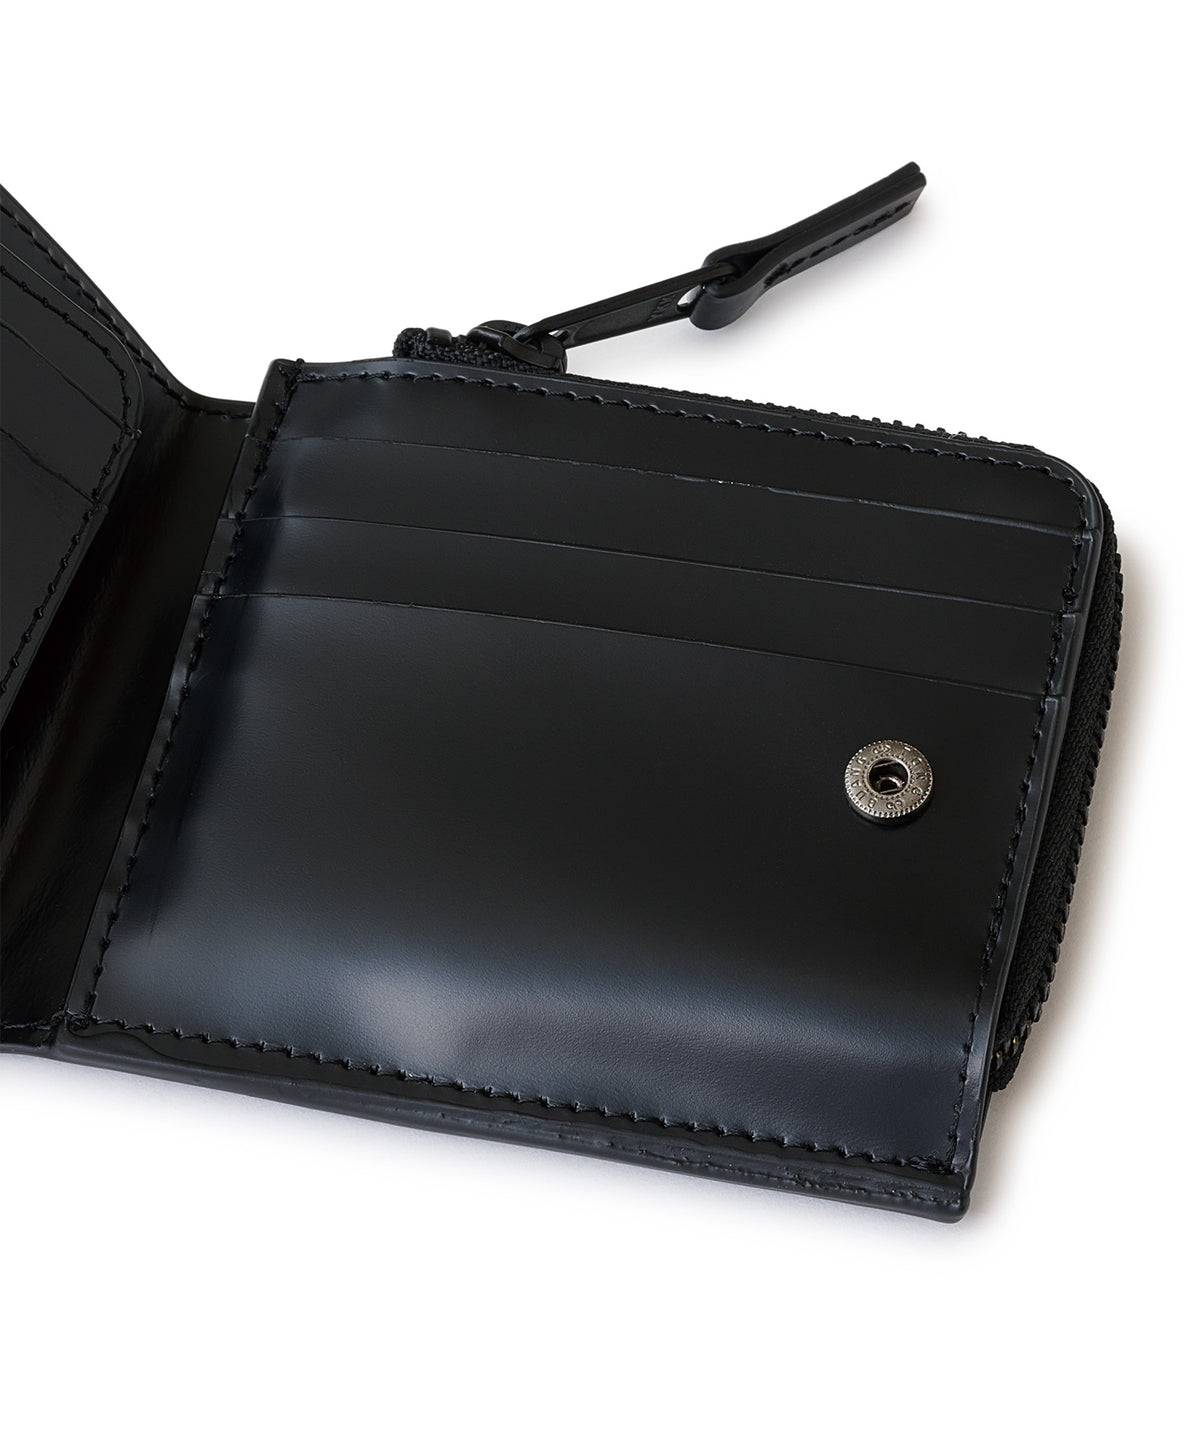 FTC LUXE LEATHER WALLET